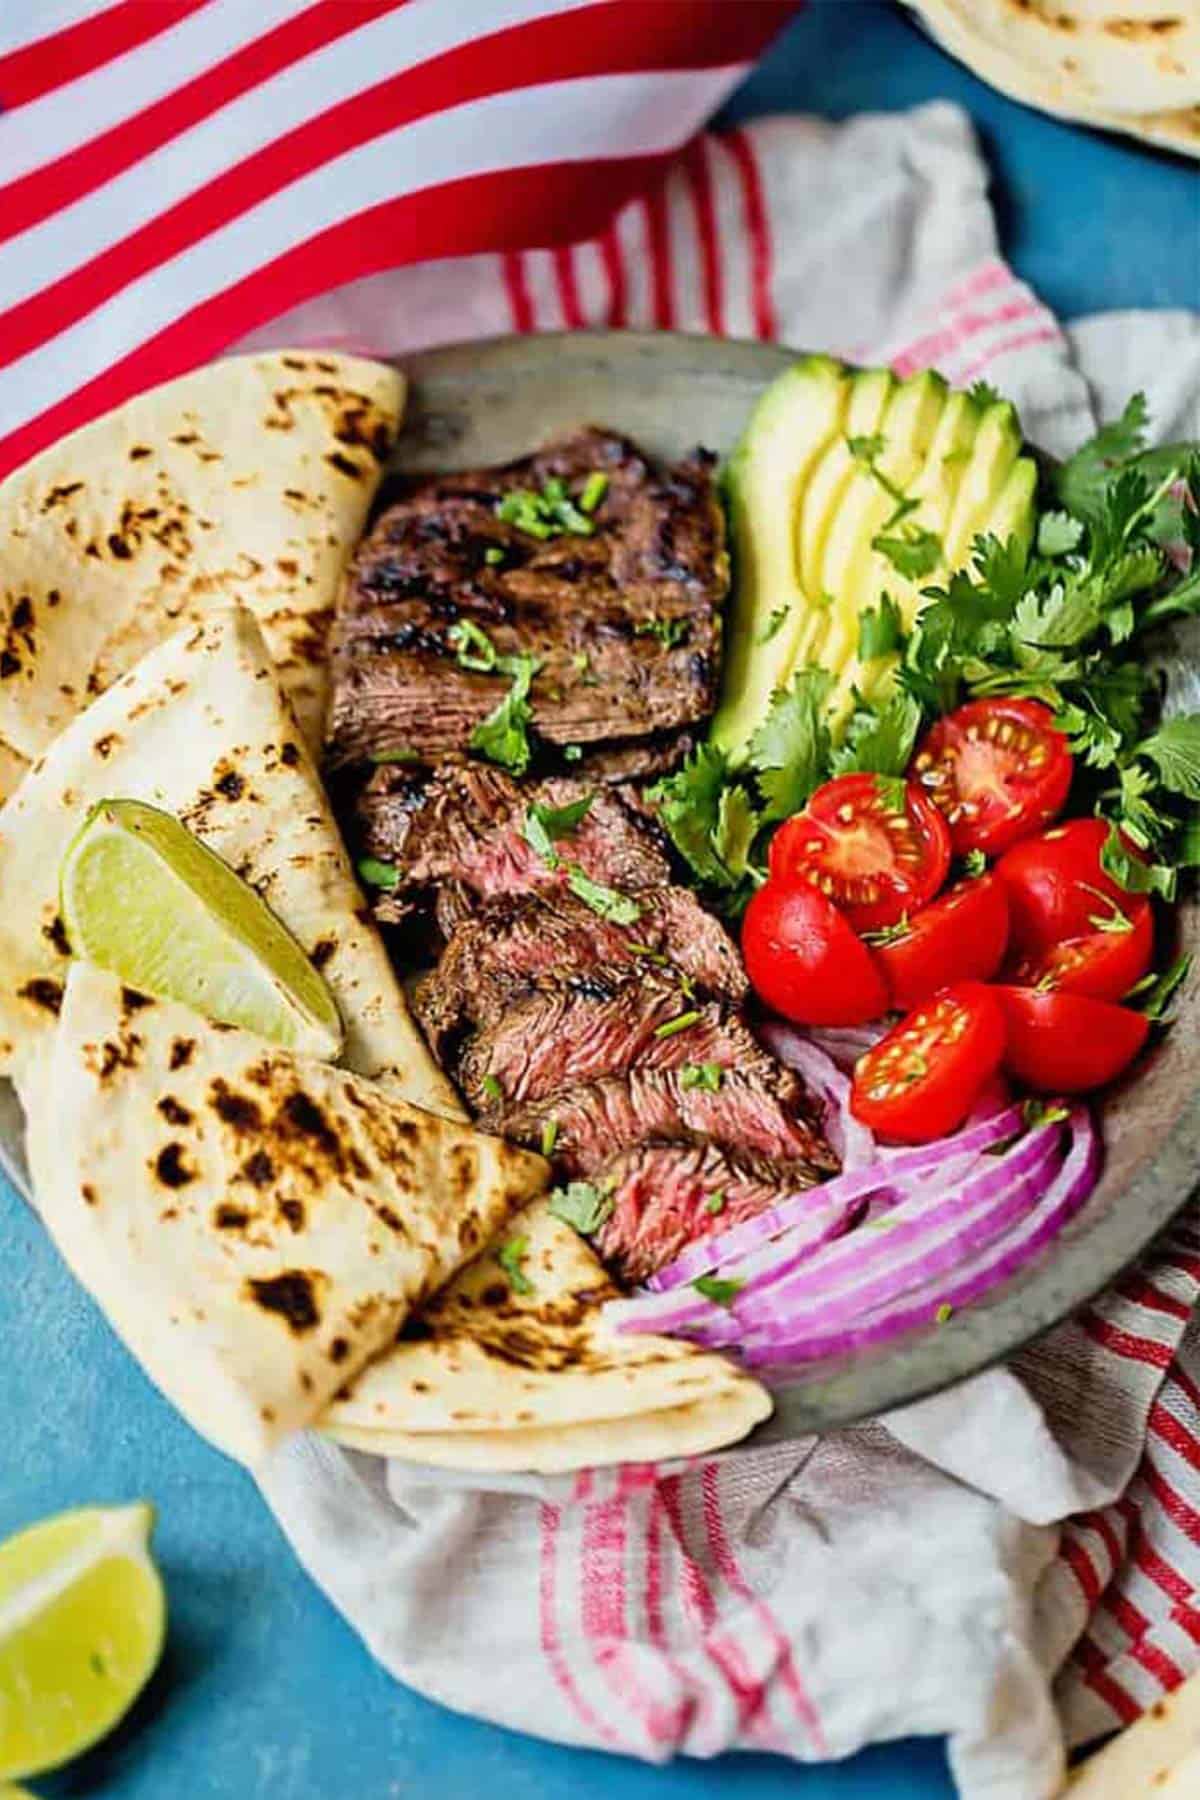 Carne asada recipe sliced on a platter with tortillas and limes scattered around